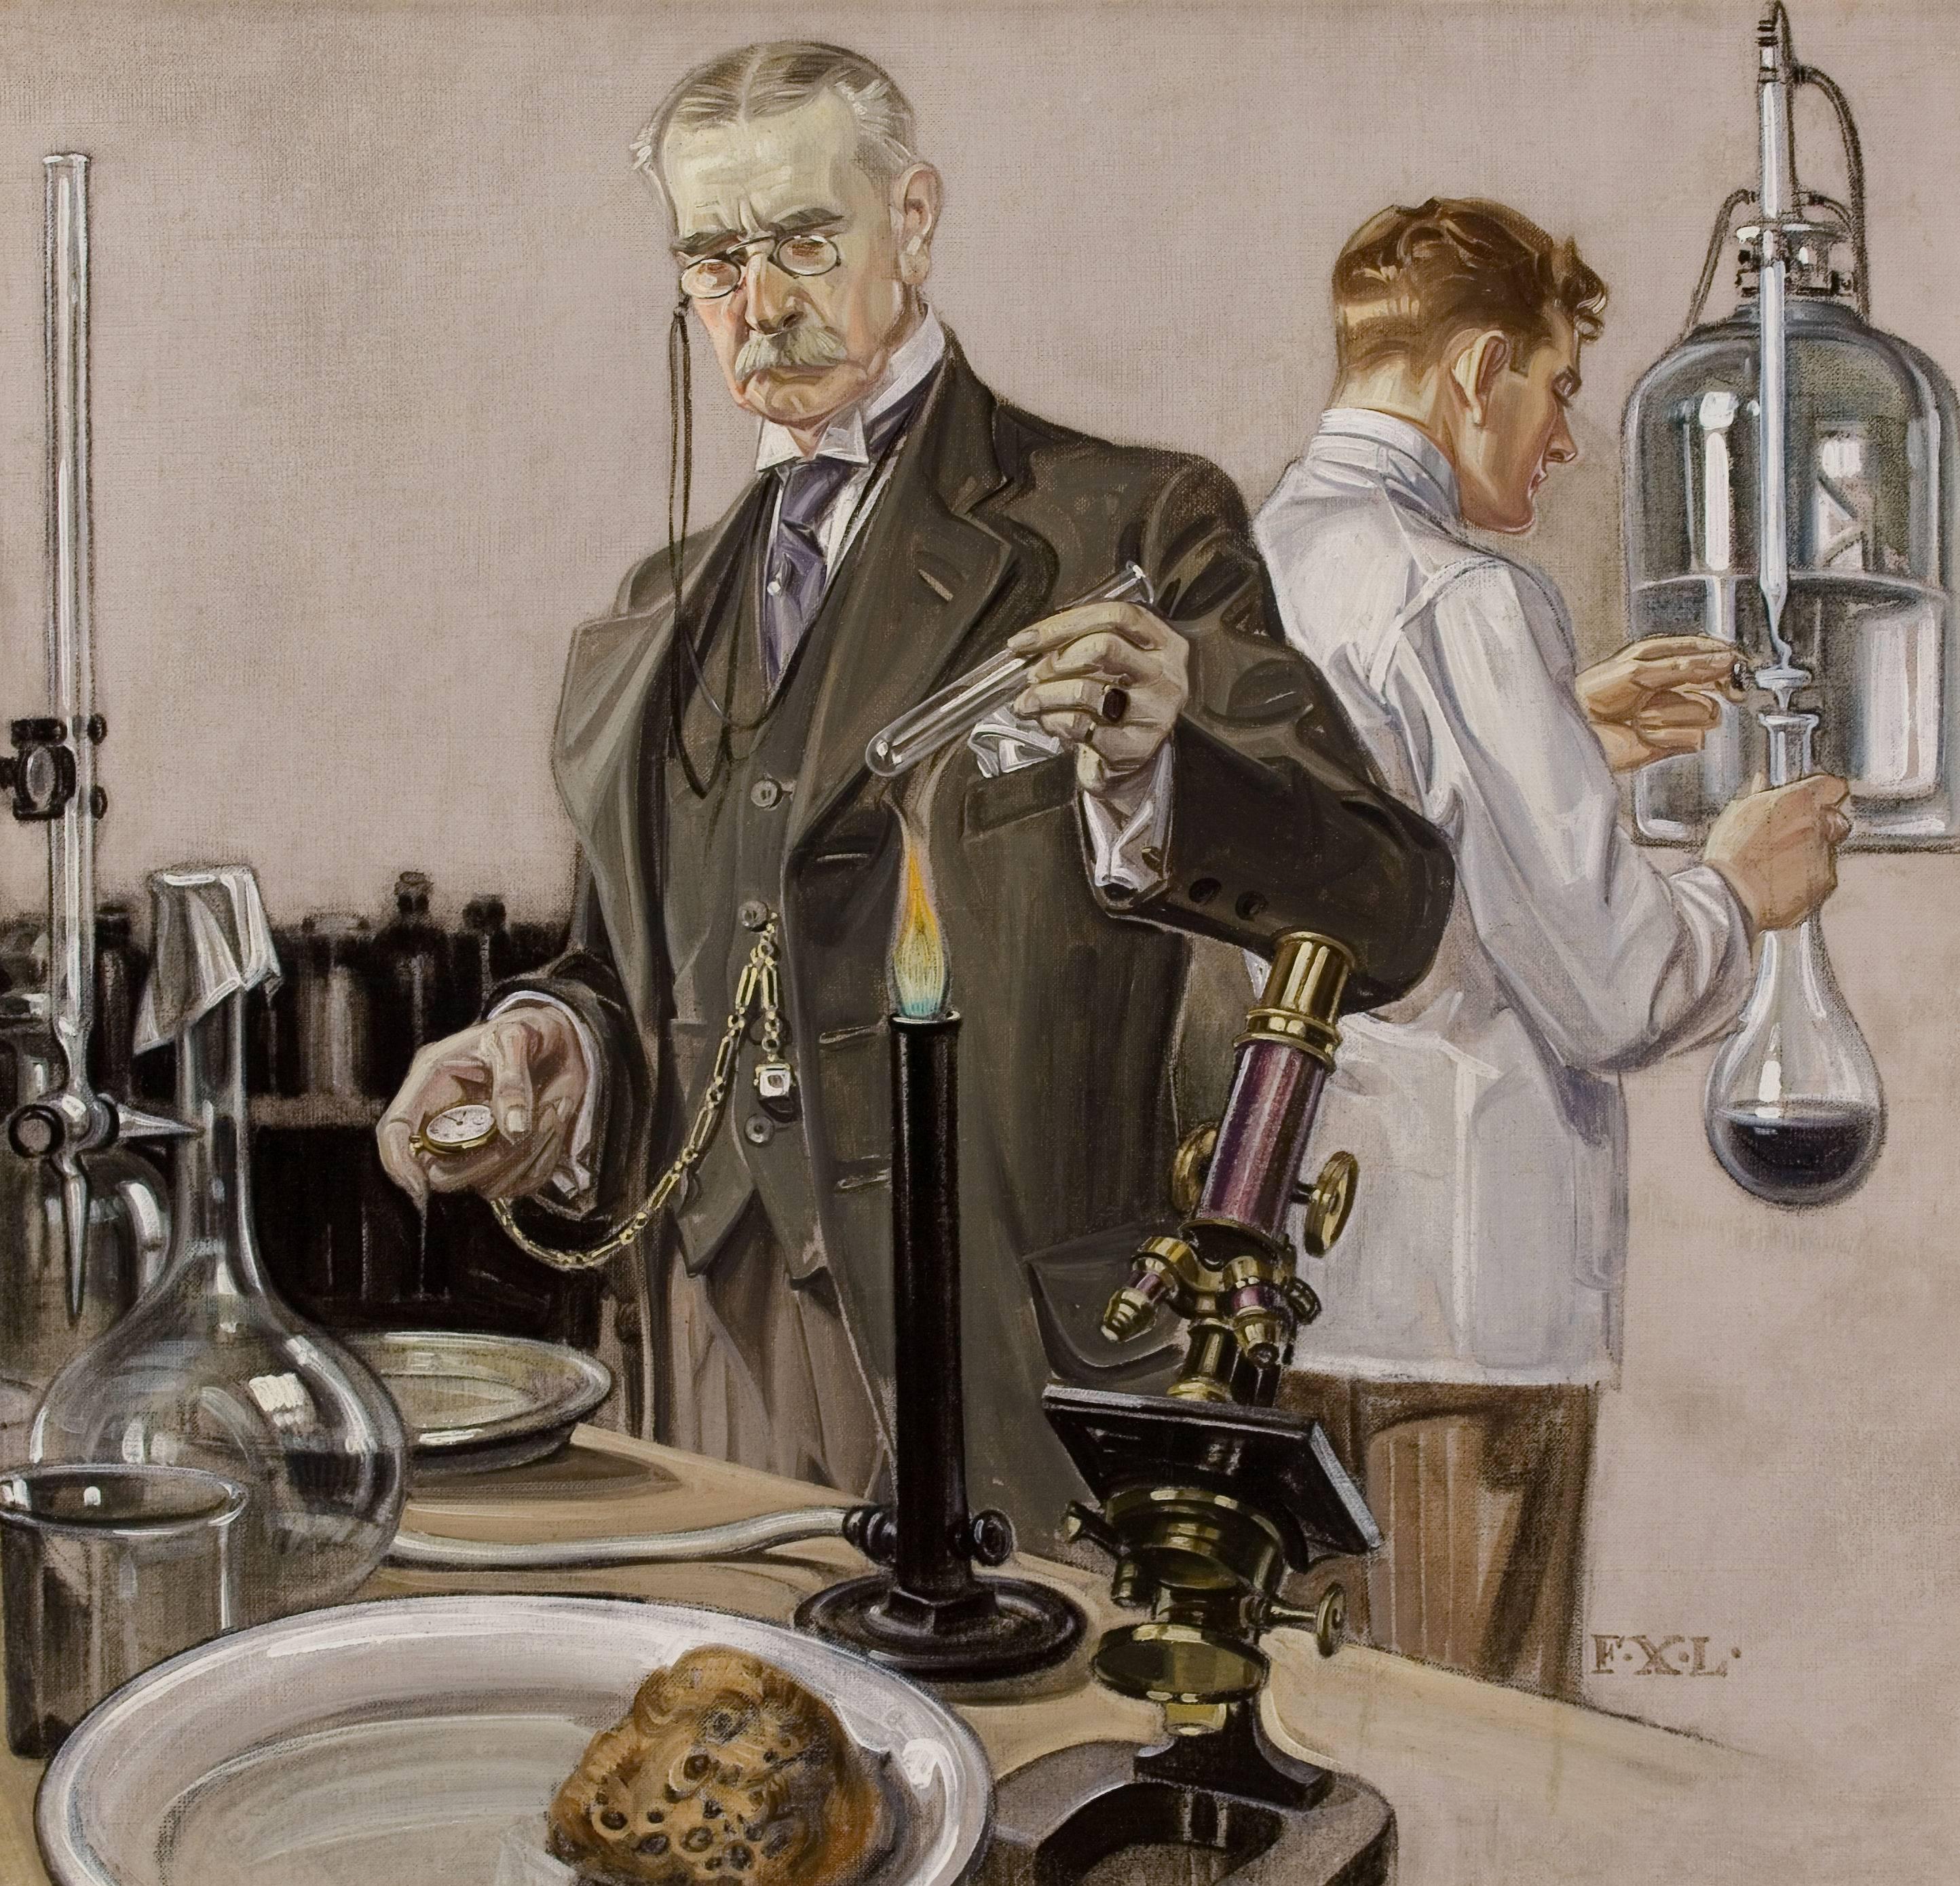 Timing an Experiment, Howard Watch Advertisement Illustration - Painting by Frank Xavier Leyendecker